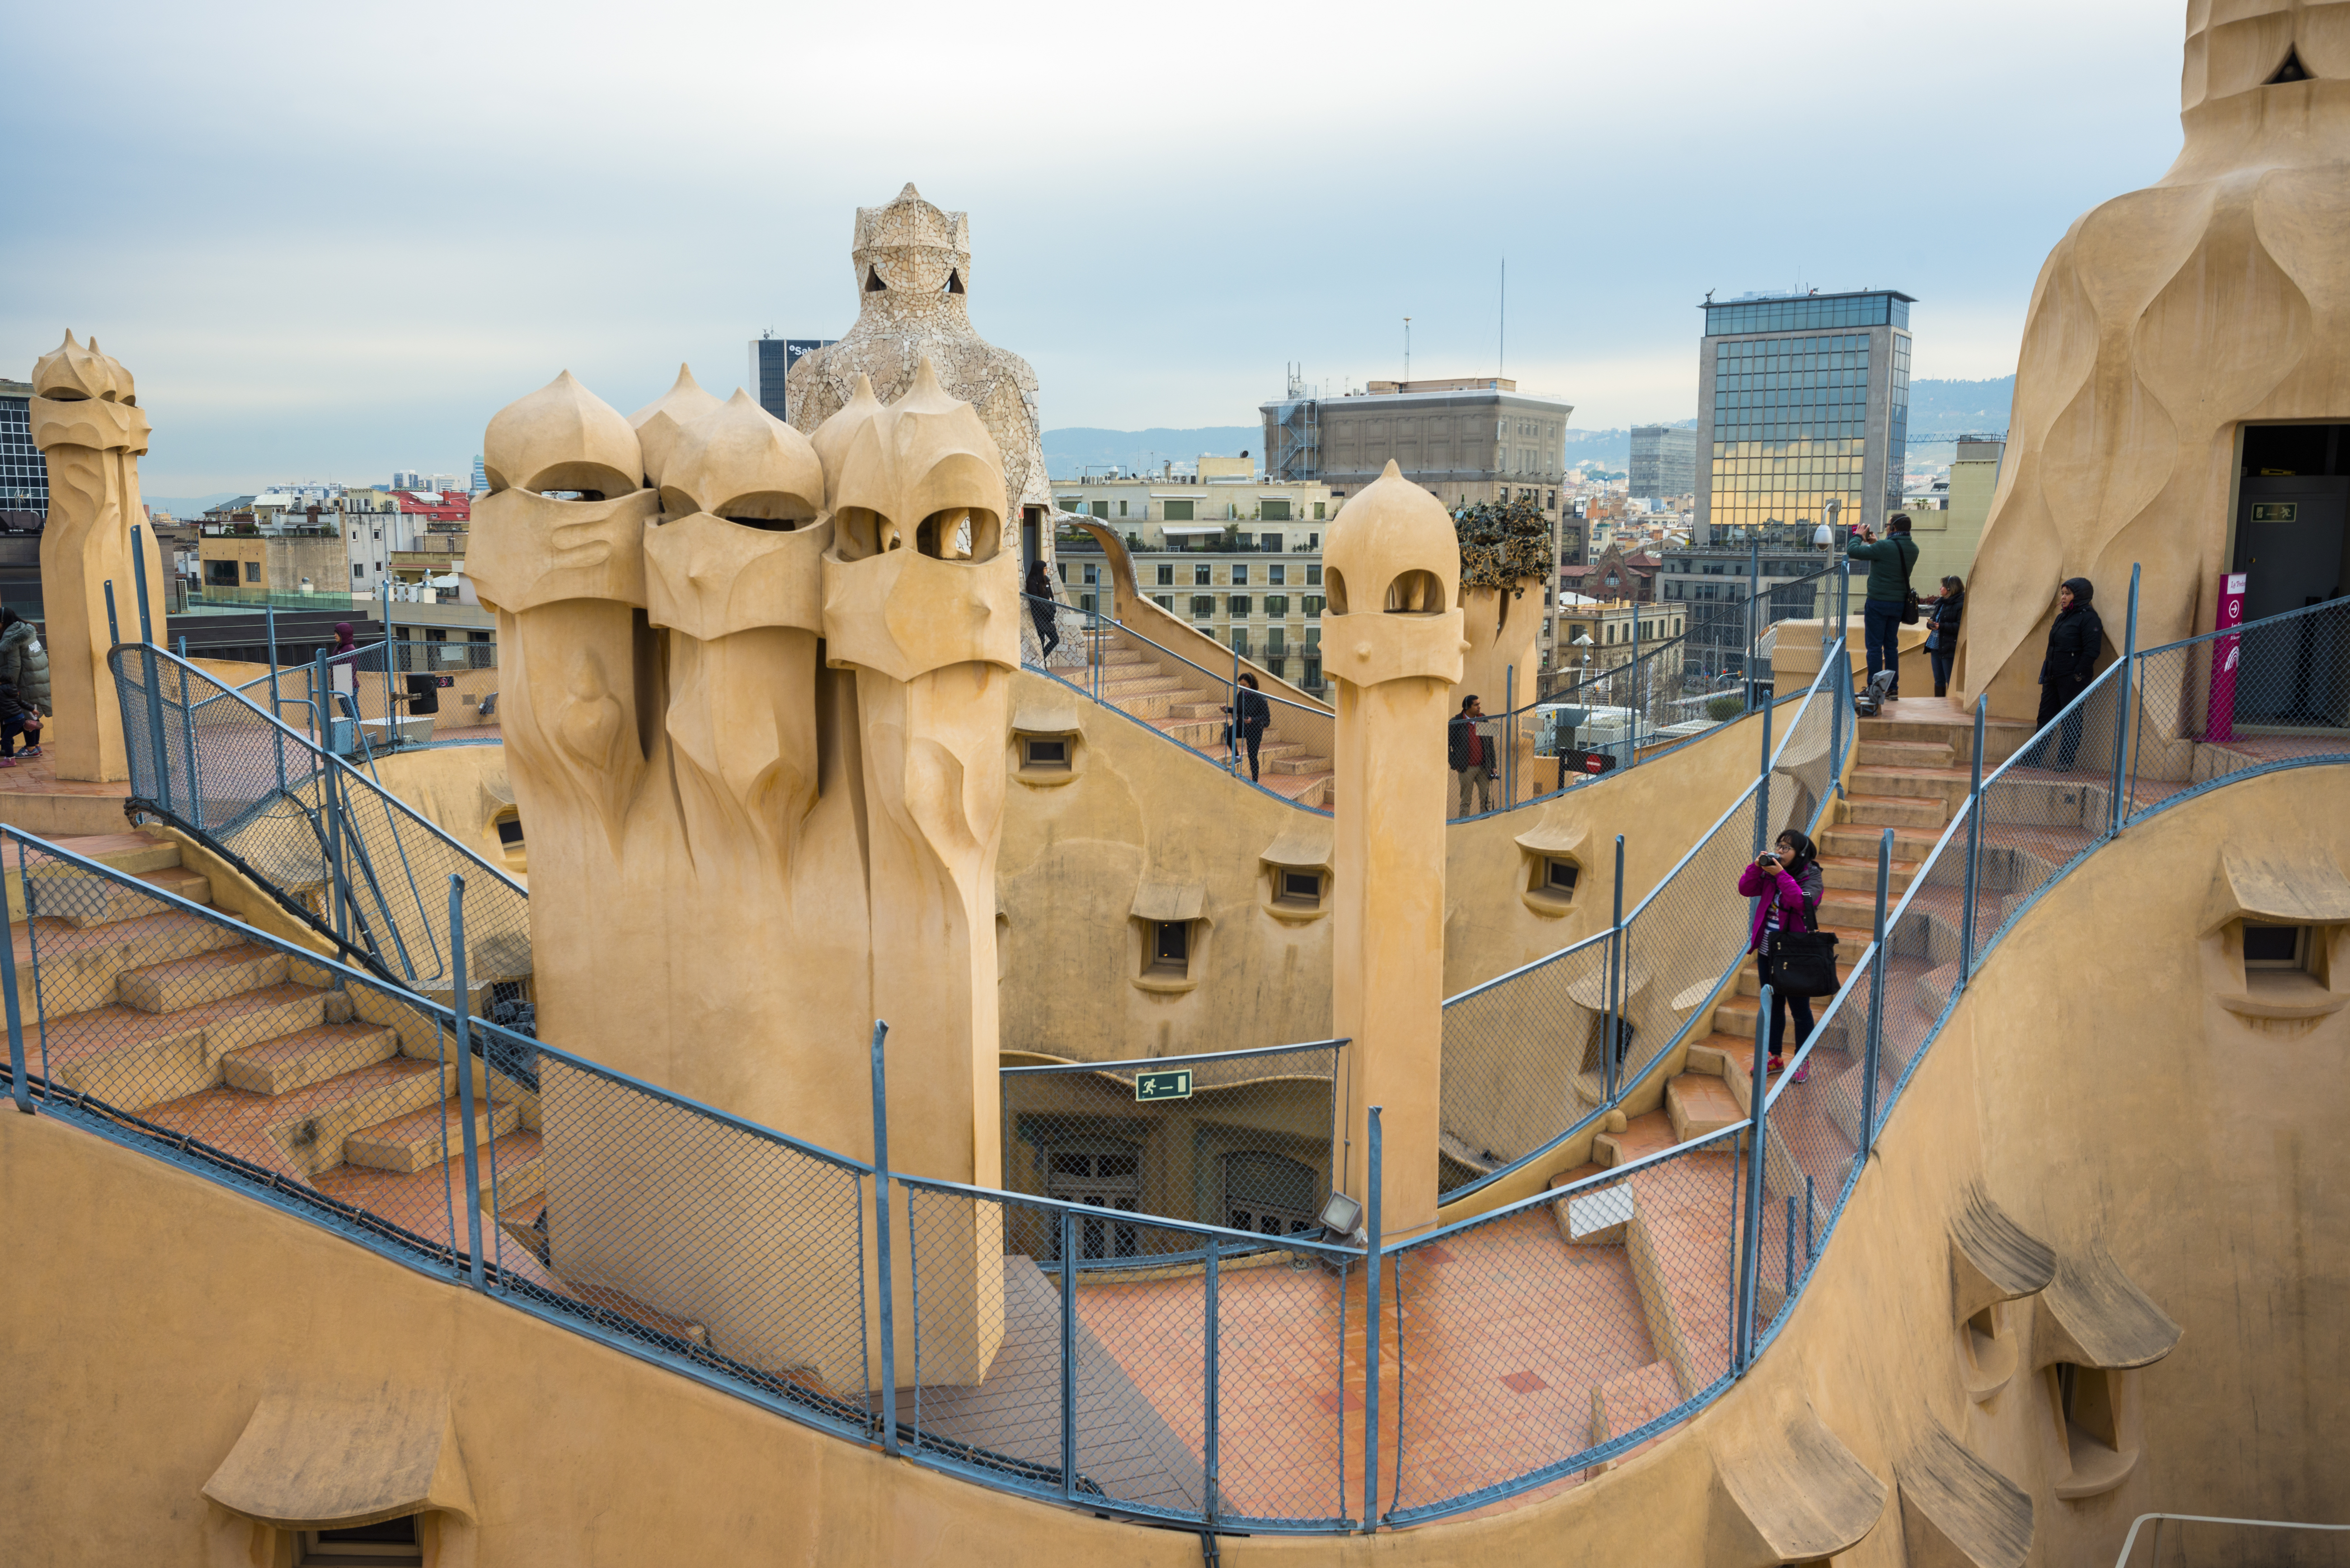 Barcelona, Guadi’s The Pedrera (Casa Mila) on the roof with its unusual chimneys, Catalonia, Spain